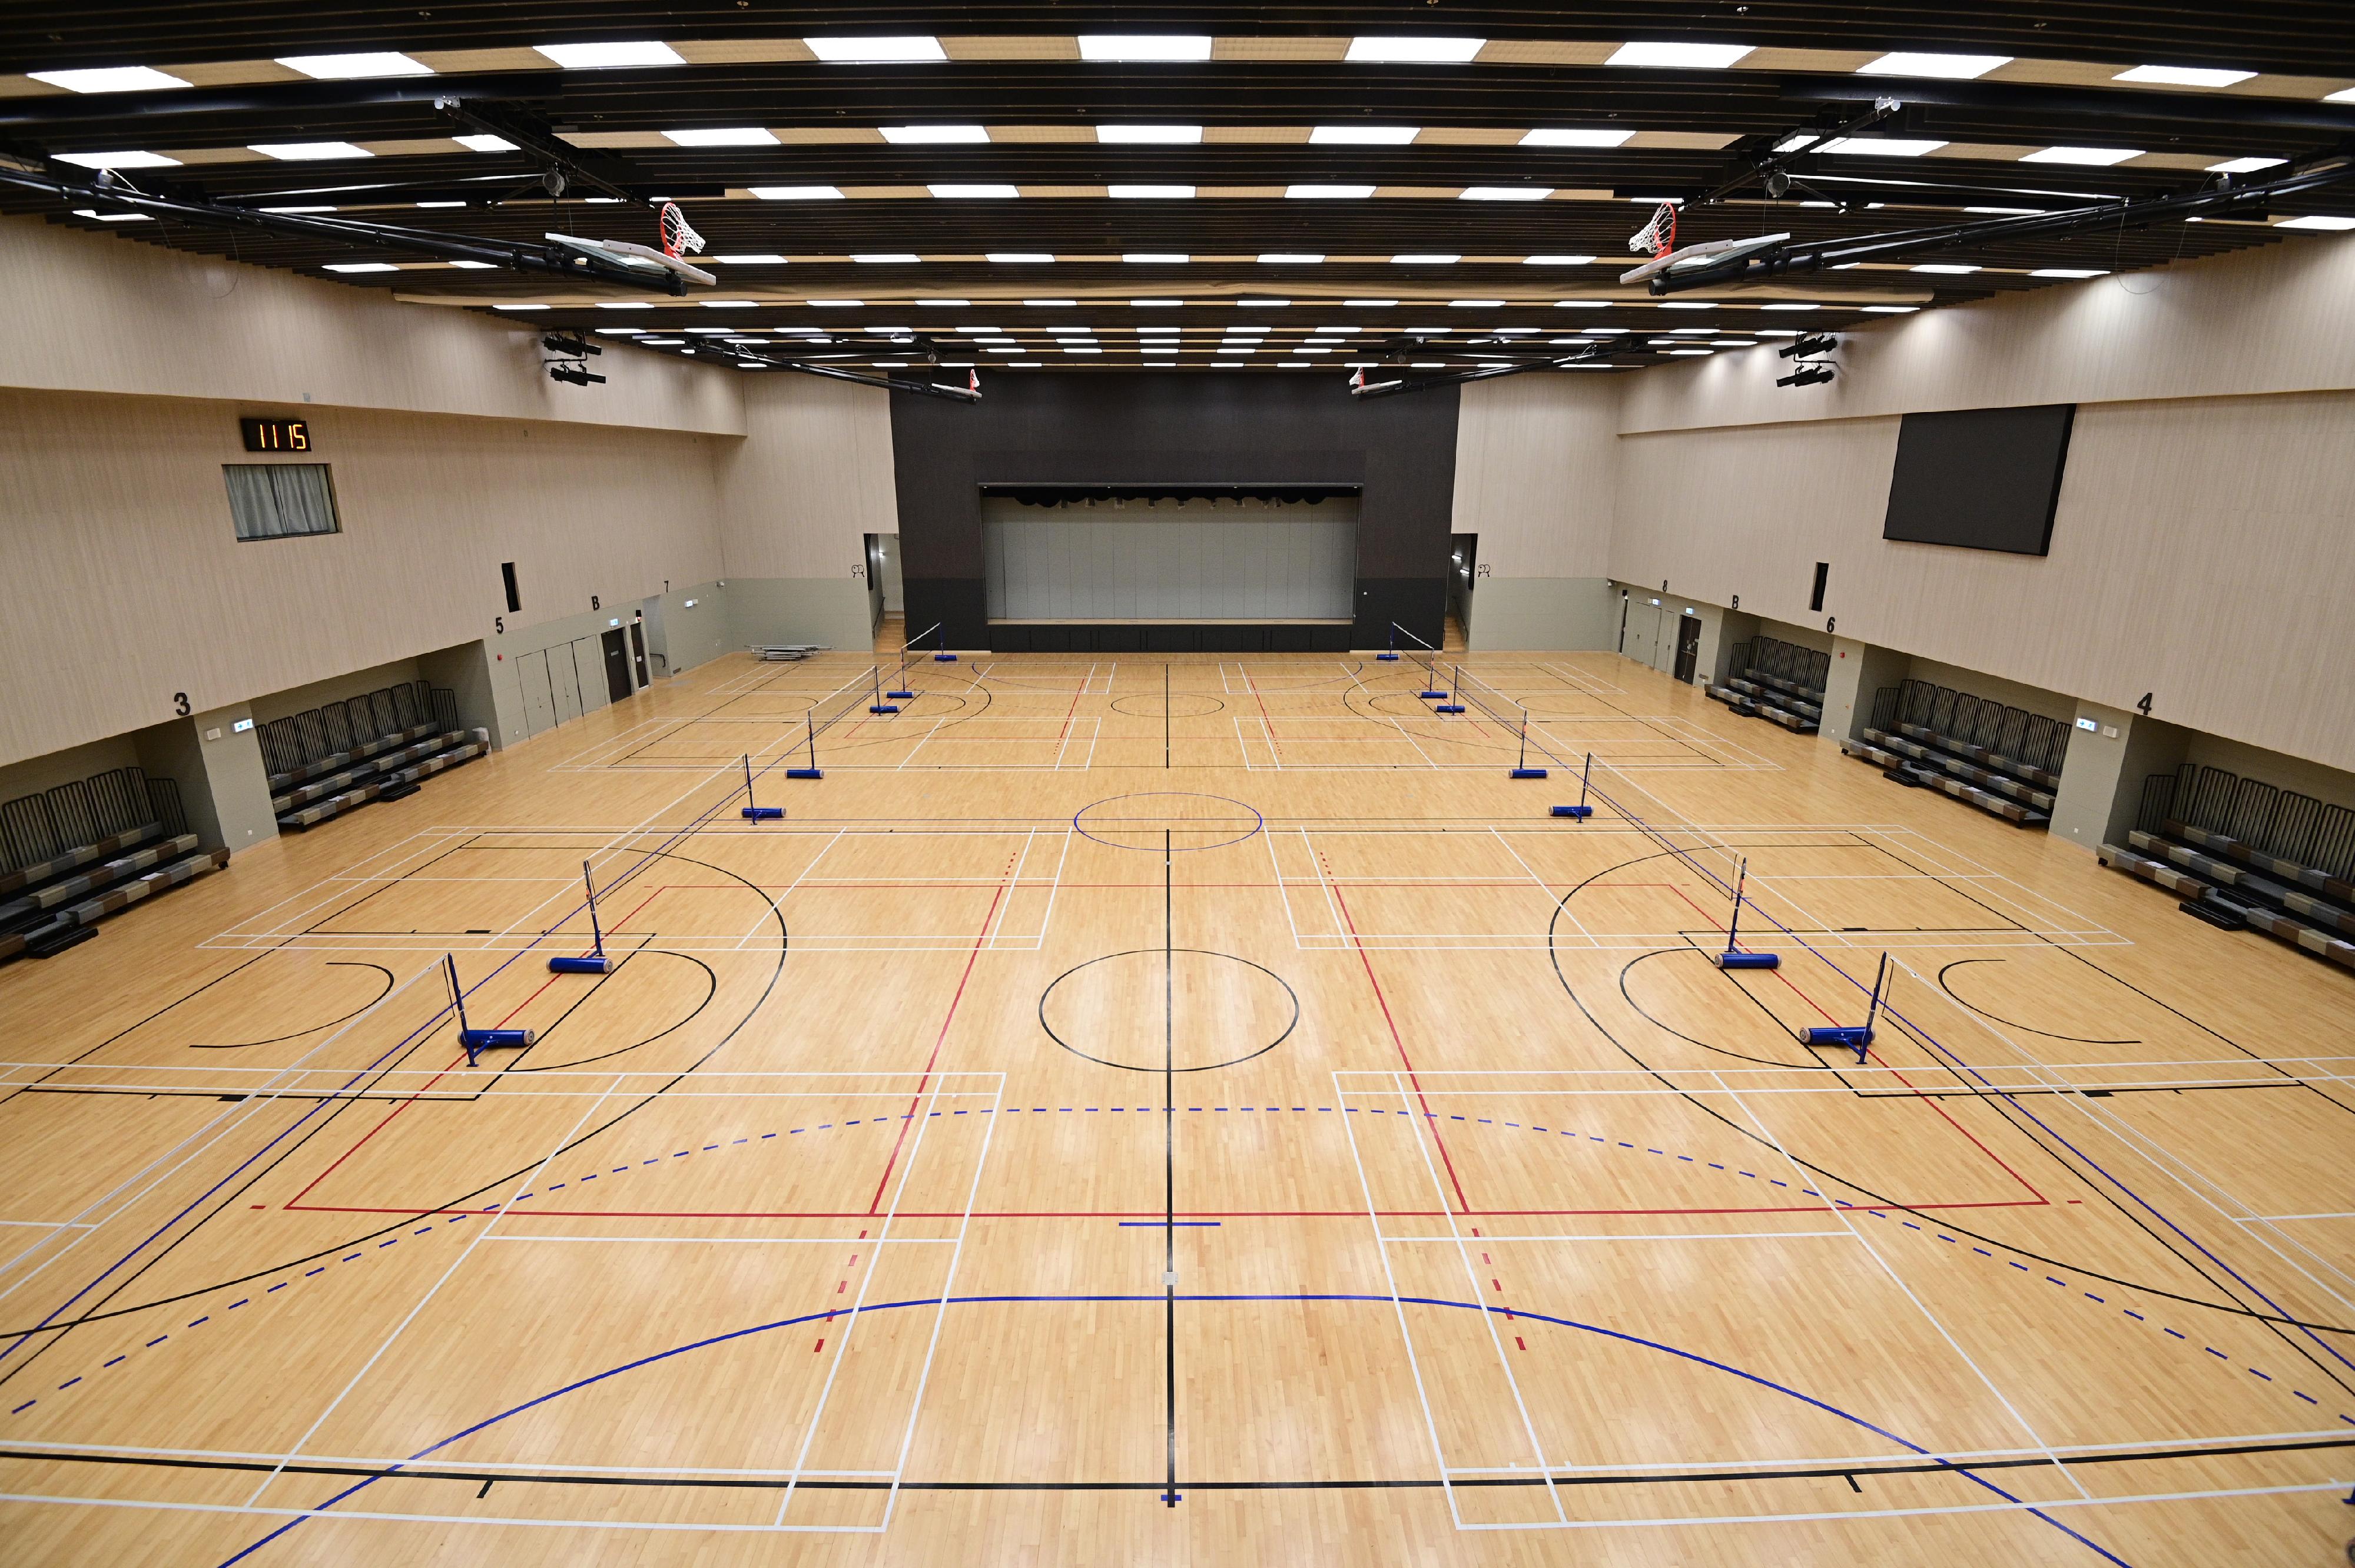 Sham Shui Po Sports Centre, managed by the Leisure and Cultural Services Department, will open for public use on September 28 (Wednesday). The new Sham Shui Po Sports Centre has a total area of about 5 570 square metres, providing a wide range of leisure and sports facilities. Photo shows the multi-purpose arena, which can serve as two basketball courts or two volleyball courts or eight badminton courts or a handball court; and be flexibly adopted as a venue for community activities with a seating capacity of about 1 000 people.